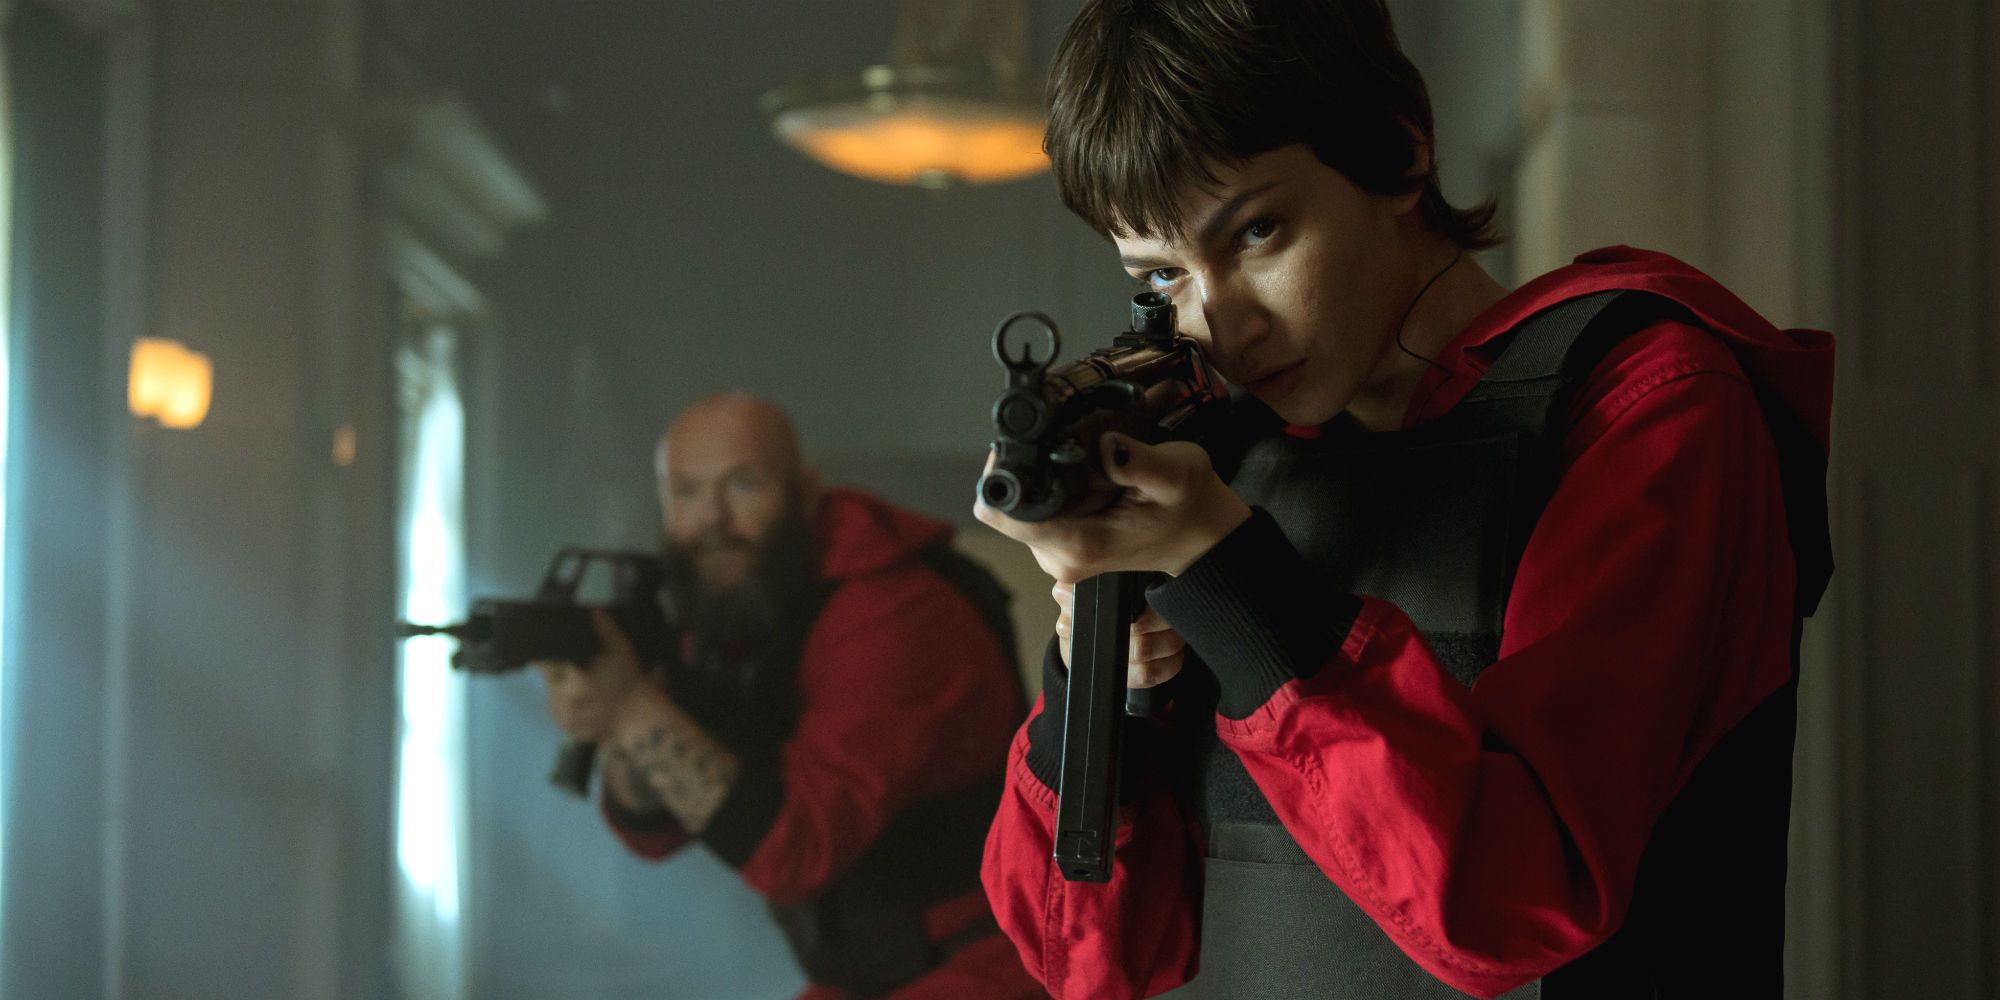 An image of Tokyo holding a gun in the foreground with Helsinki following her in the background in the show Money Heist.